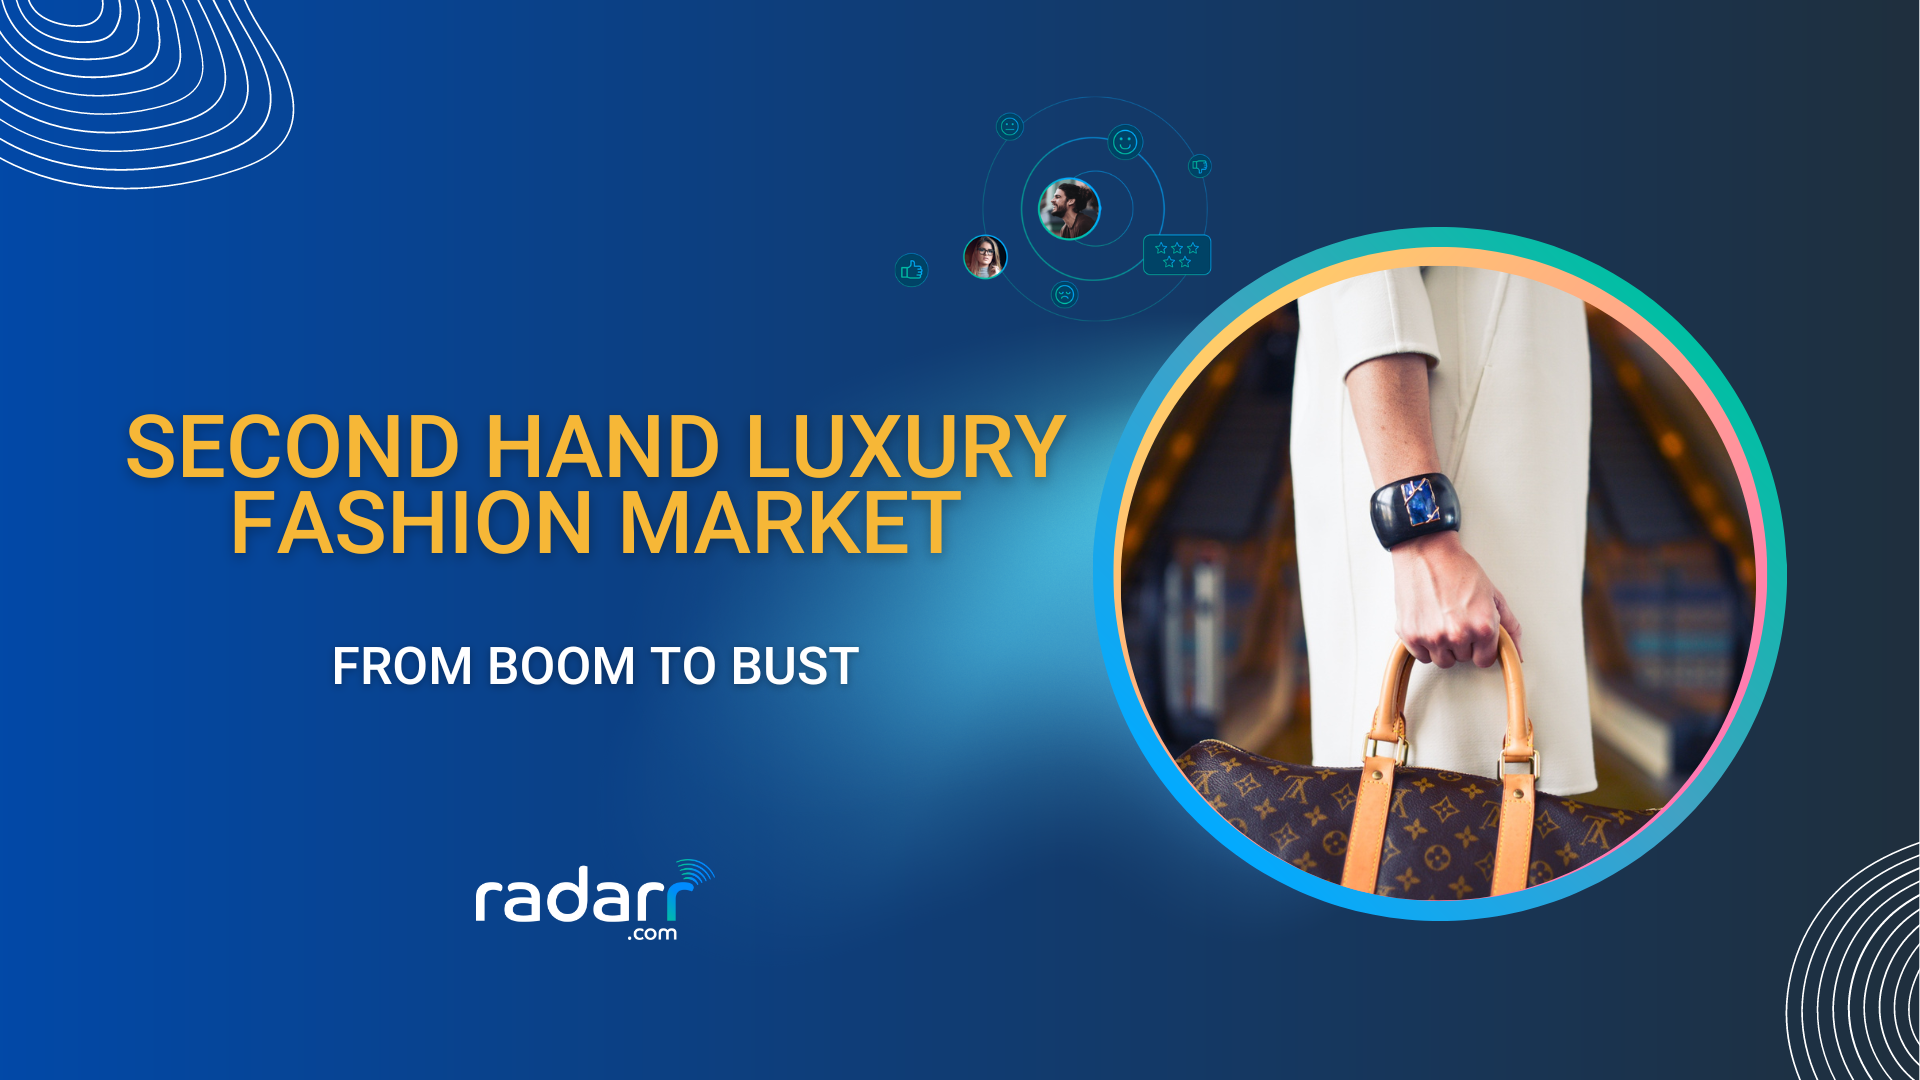 From Boom to Bust: Analyzing the Second Hand Luxury Fashion Market's Bubble Burst